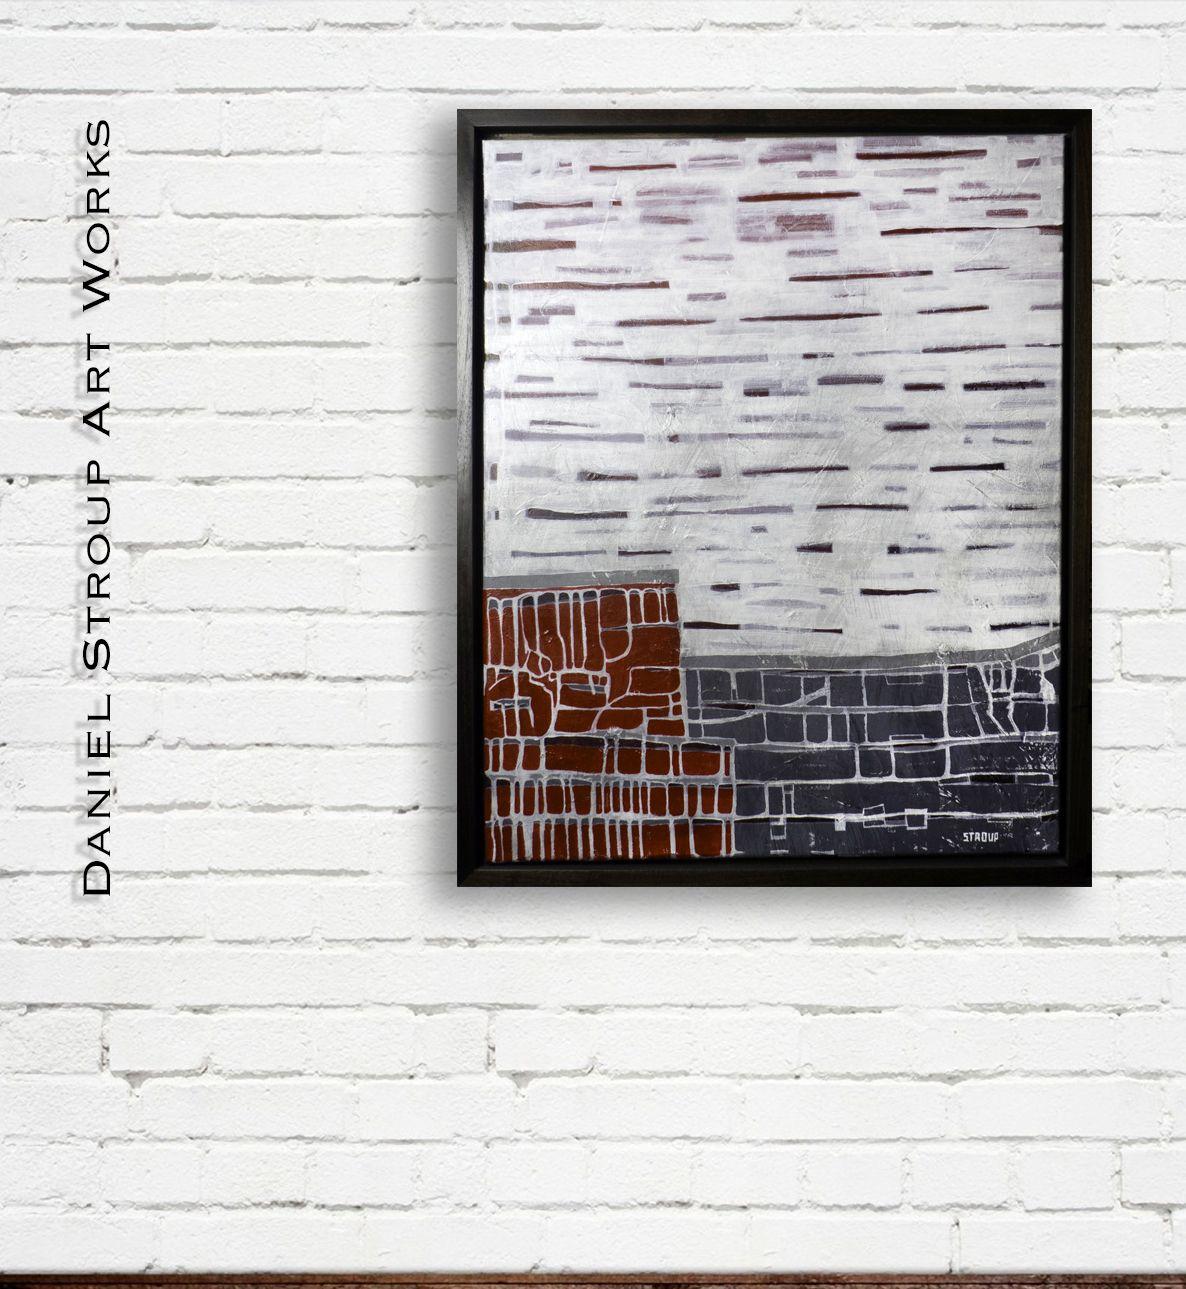 Reminiscent of the apartment buildings I saw rising up all over China. Highly textured, simplistic, modern. Colorful darks and dirty whites with a splash of red will pop in any minimalist setting.    This work comes with the floating frame included.